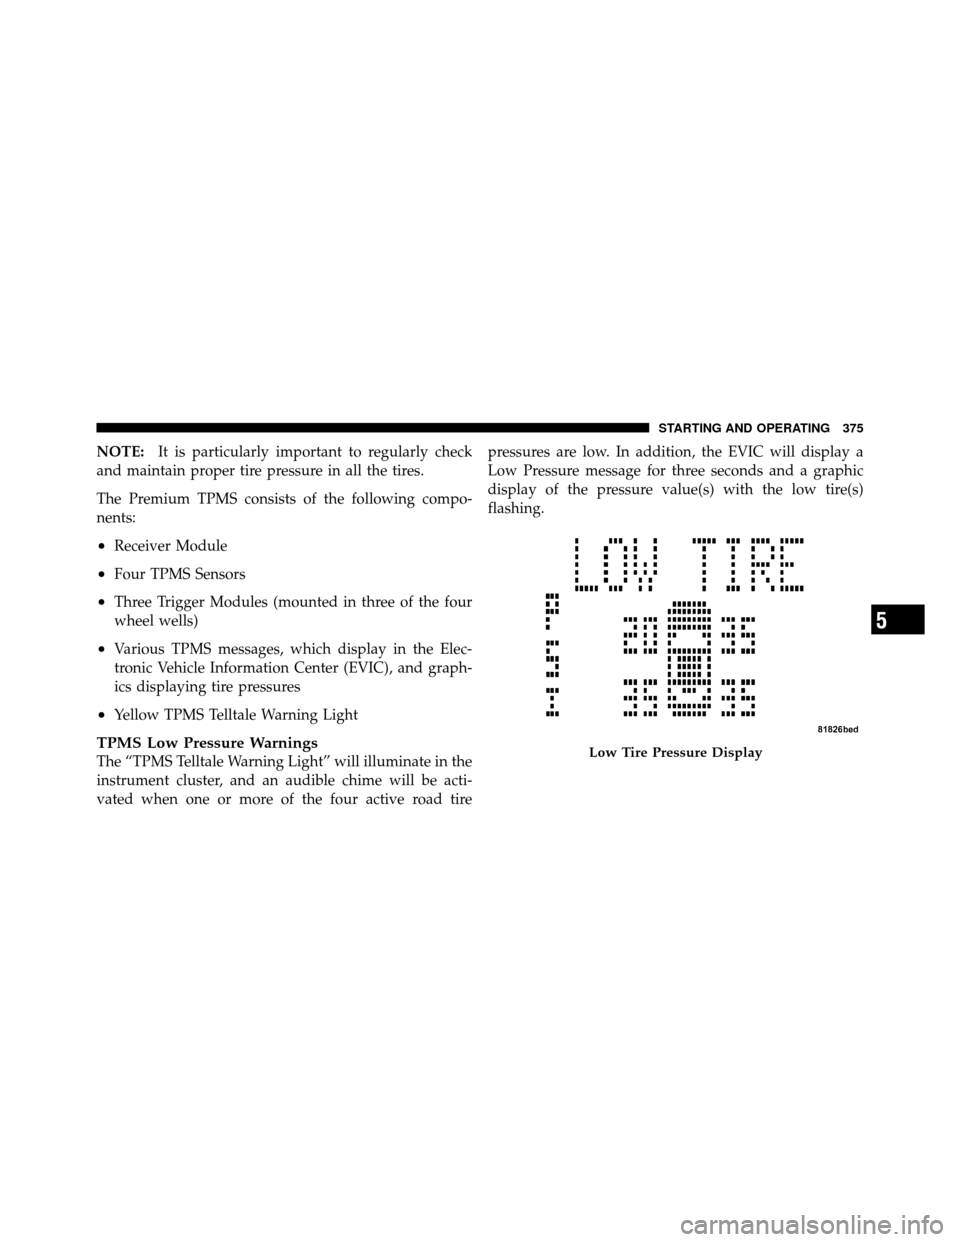 CHRYSLER TOWN AND COUNTRY 2010 5.G Owners Manual NOTE:It is particularly important to regularly check
and maintain proper tire pressure in all the tires.
The Premium TPMS consists of the following compo-
nents:
•Receiver Module
•Four TPMS Sensor